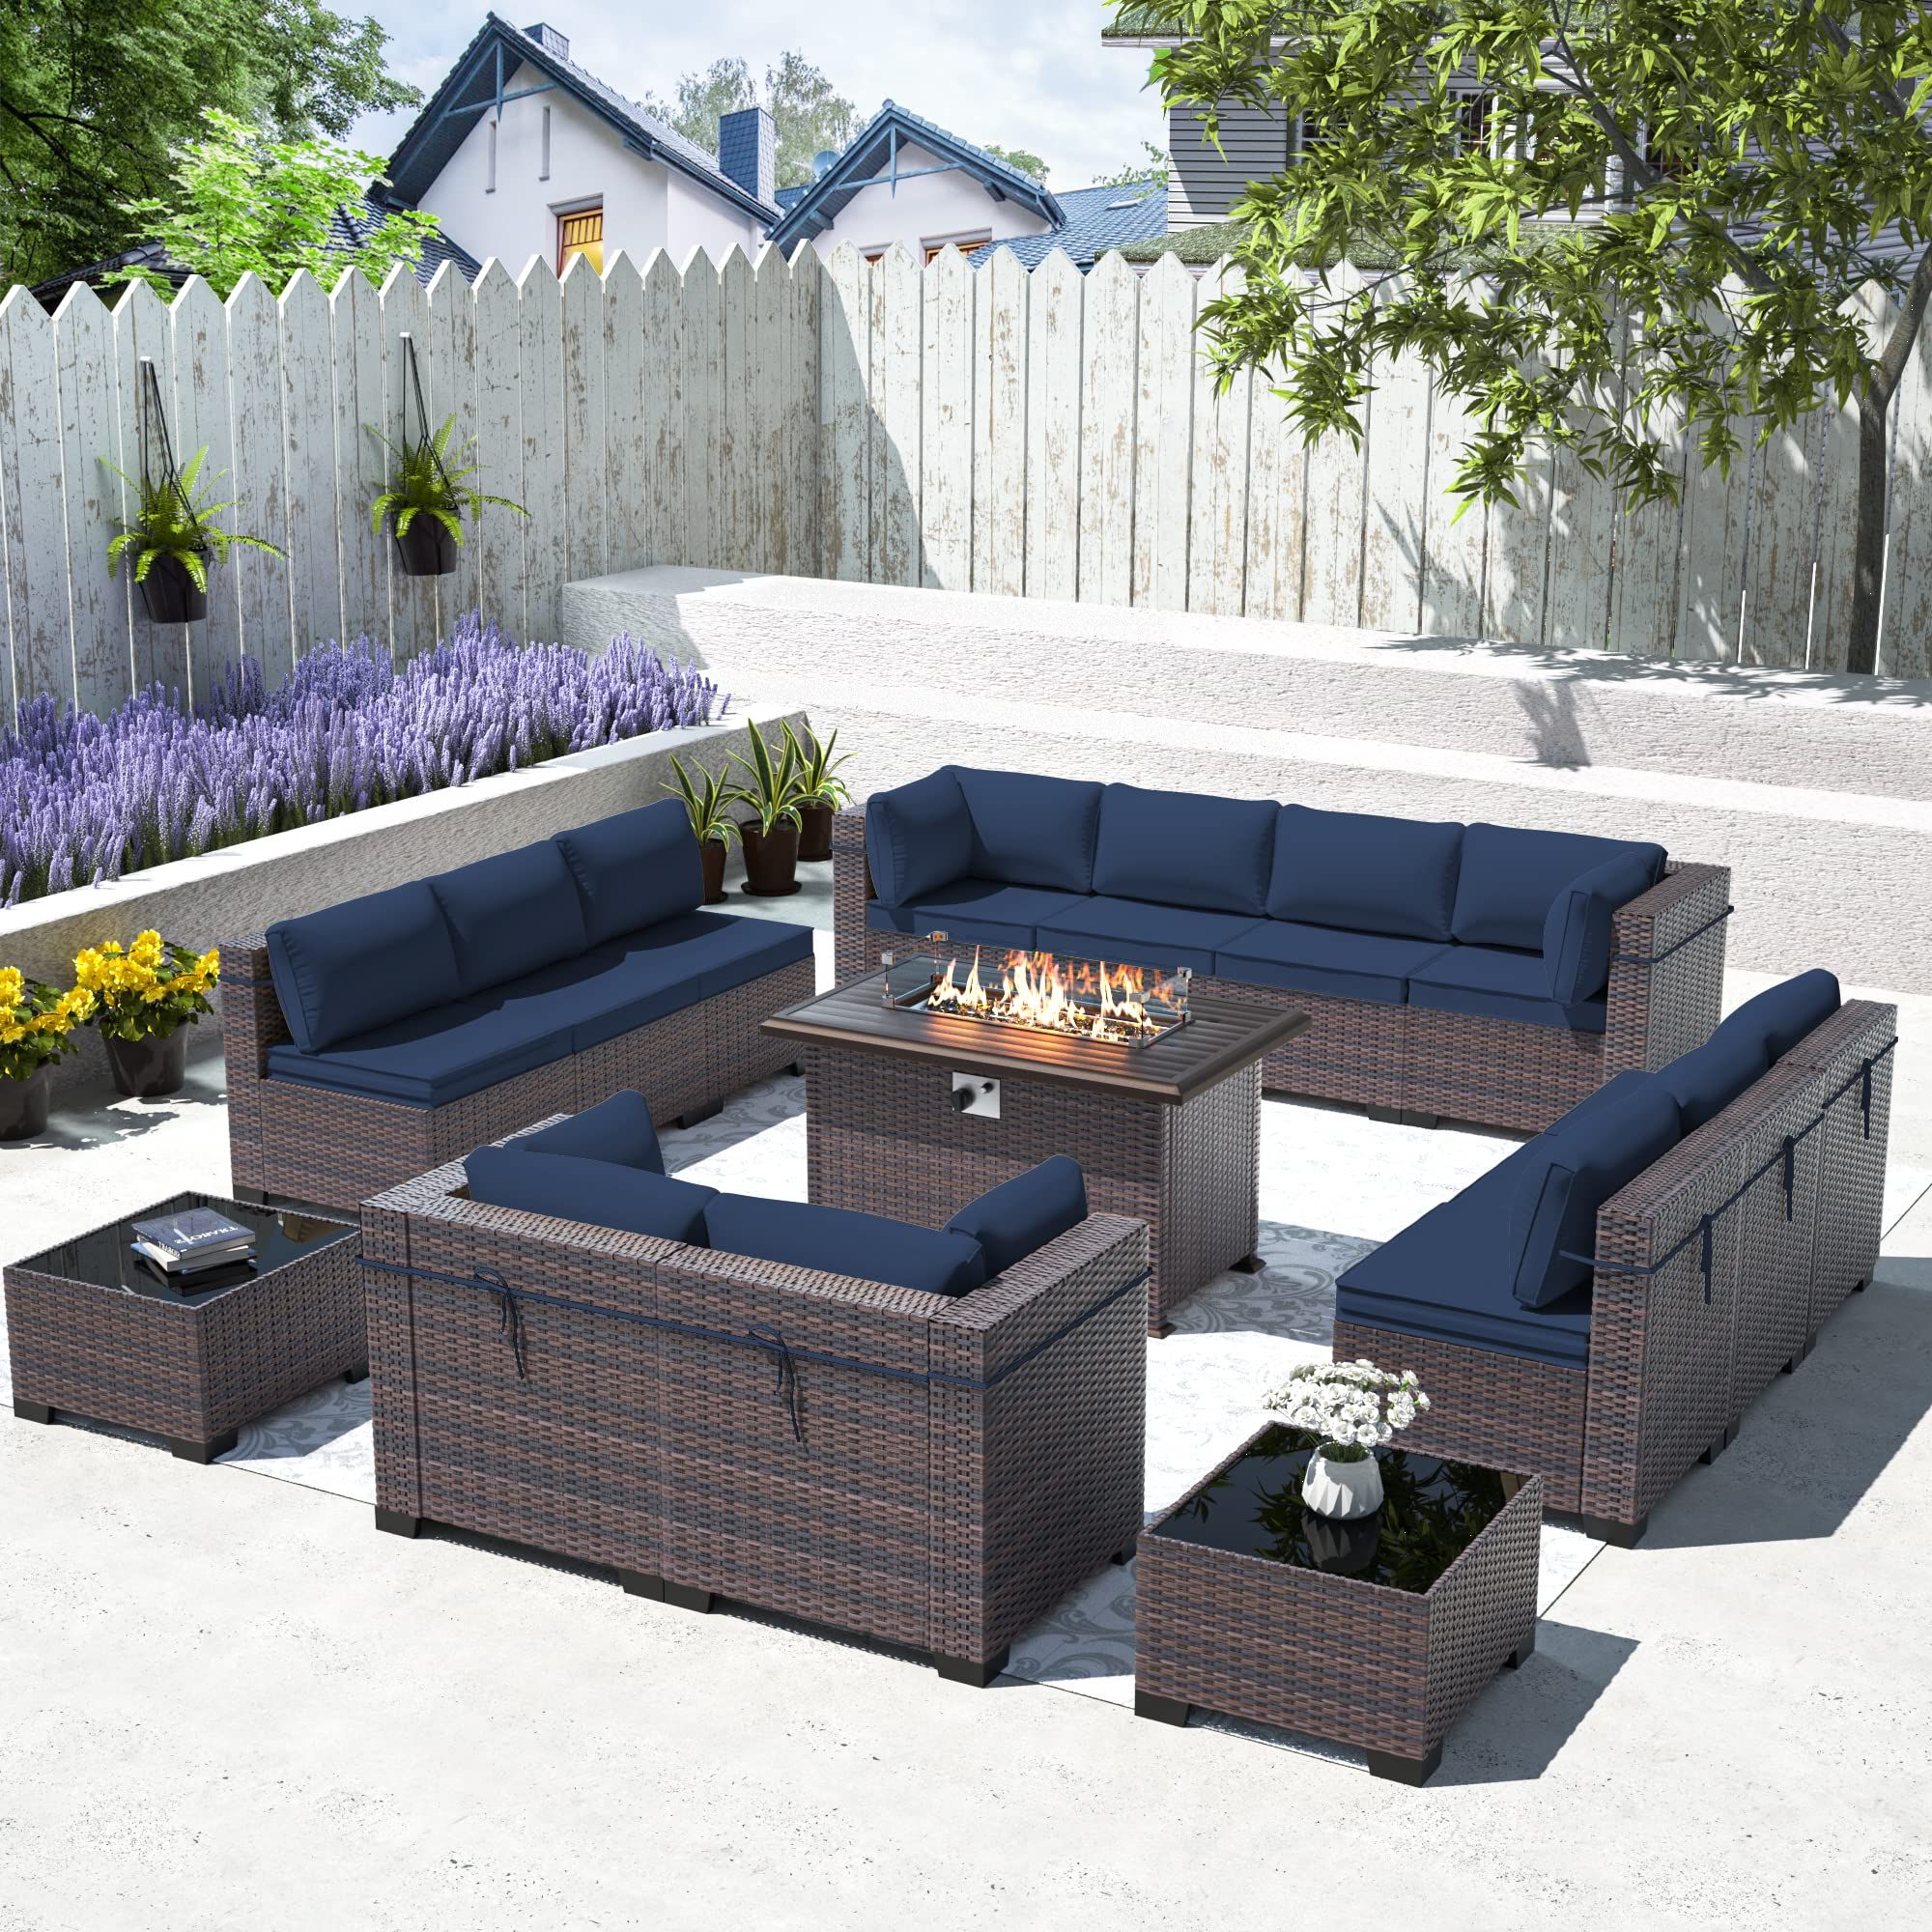 Current Amazon: Asjmr Outdoor Patio Furniture Set With Gas Fire Pit Table, 15  Pieces Outdoor Furniture Set Patio Sectional Sofa W/43in Propane Fire Pit,  Pe Wicker Rattan Patio Conversation Sets – Navy : Pertaining To Fire Pit Table Wicker Sectional Sofa Conversation Set (View 5 of 15)